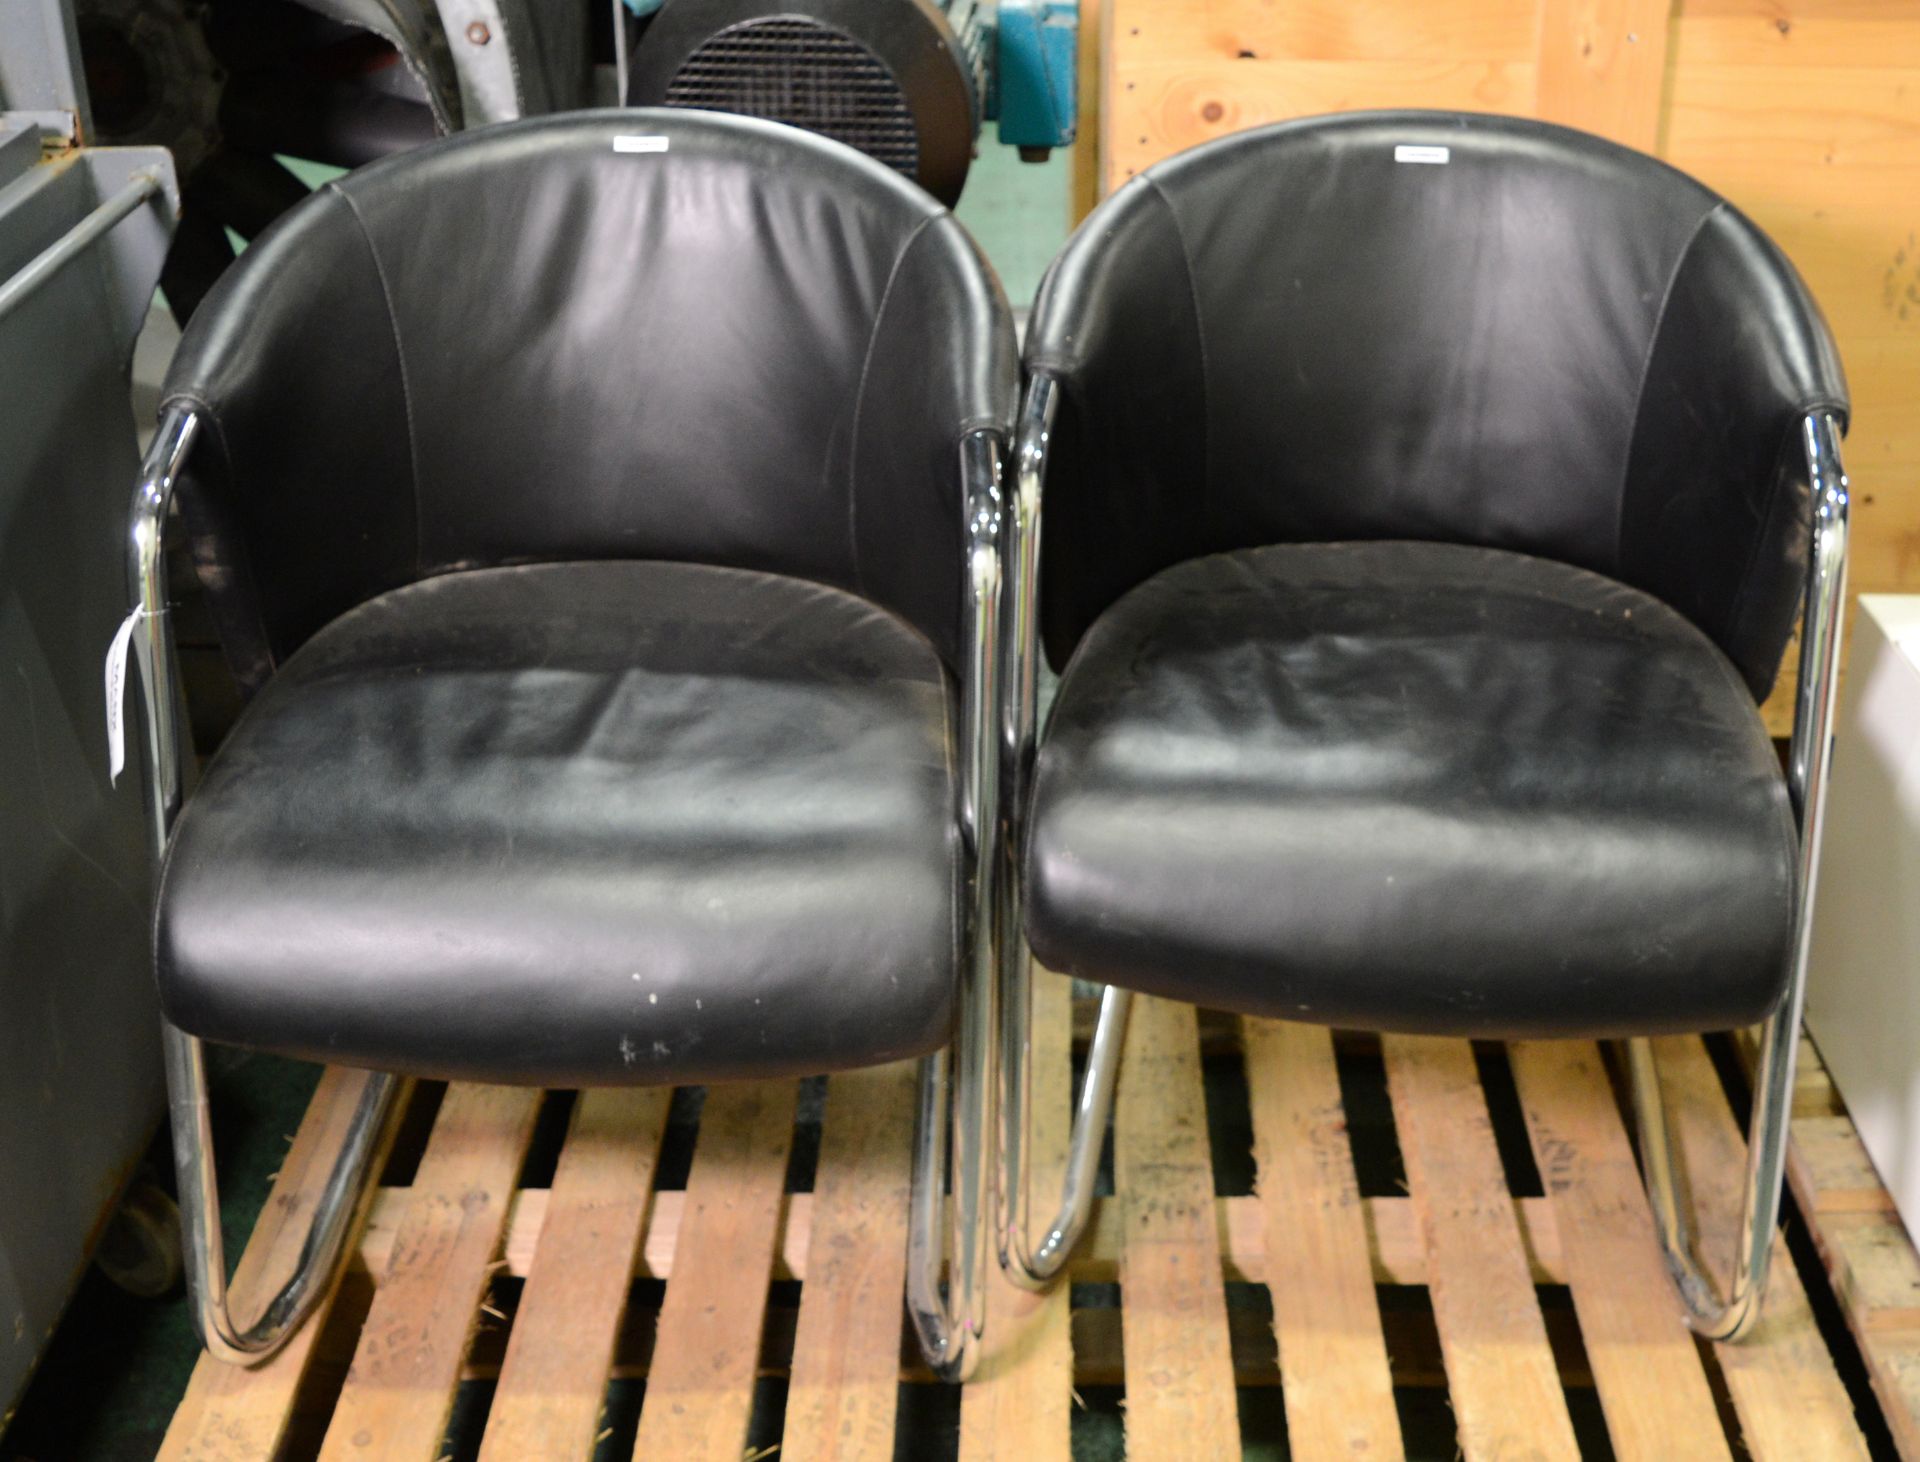 2x Leatherette Chairs with Chrome Bases.